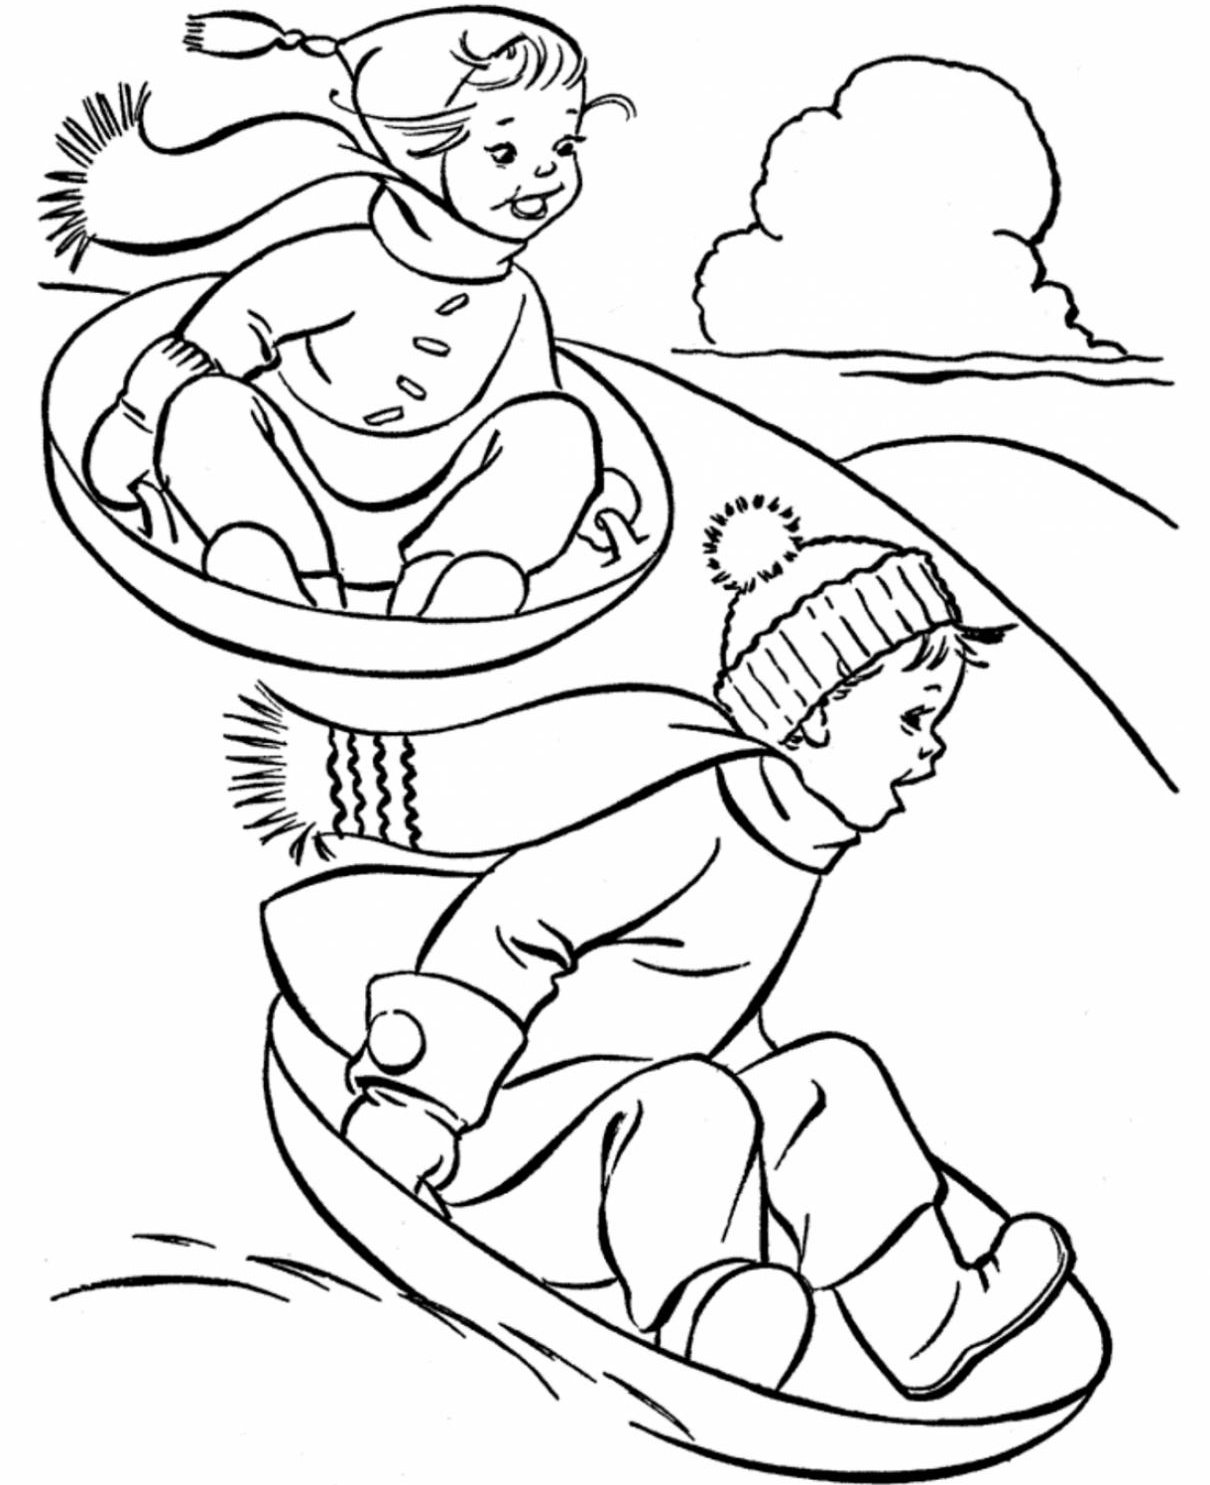 Winter Sledding Coloring Pages   Coloring Cool